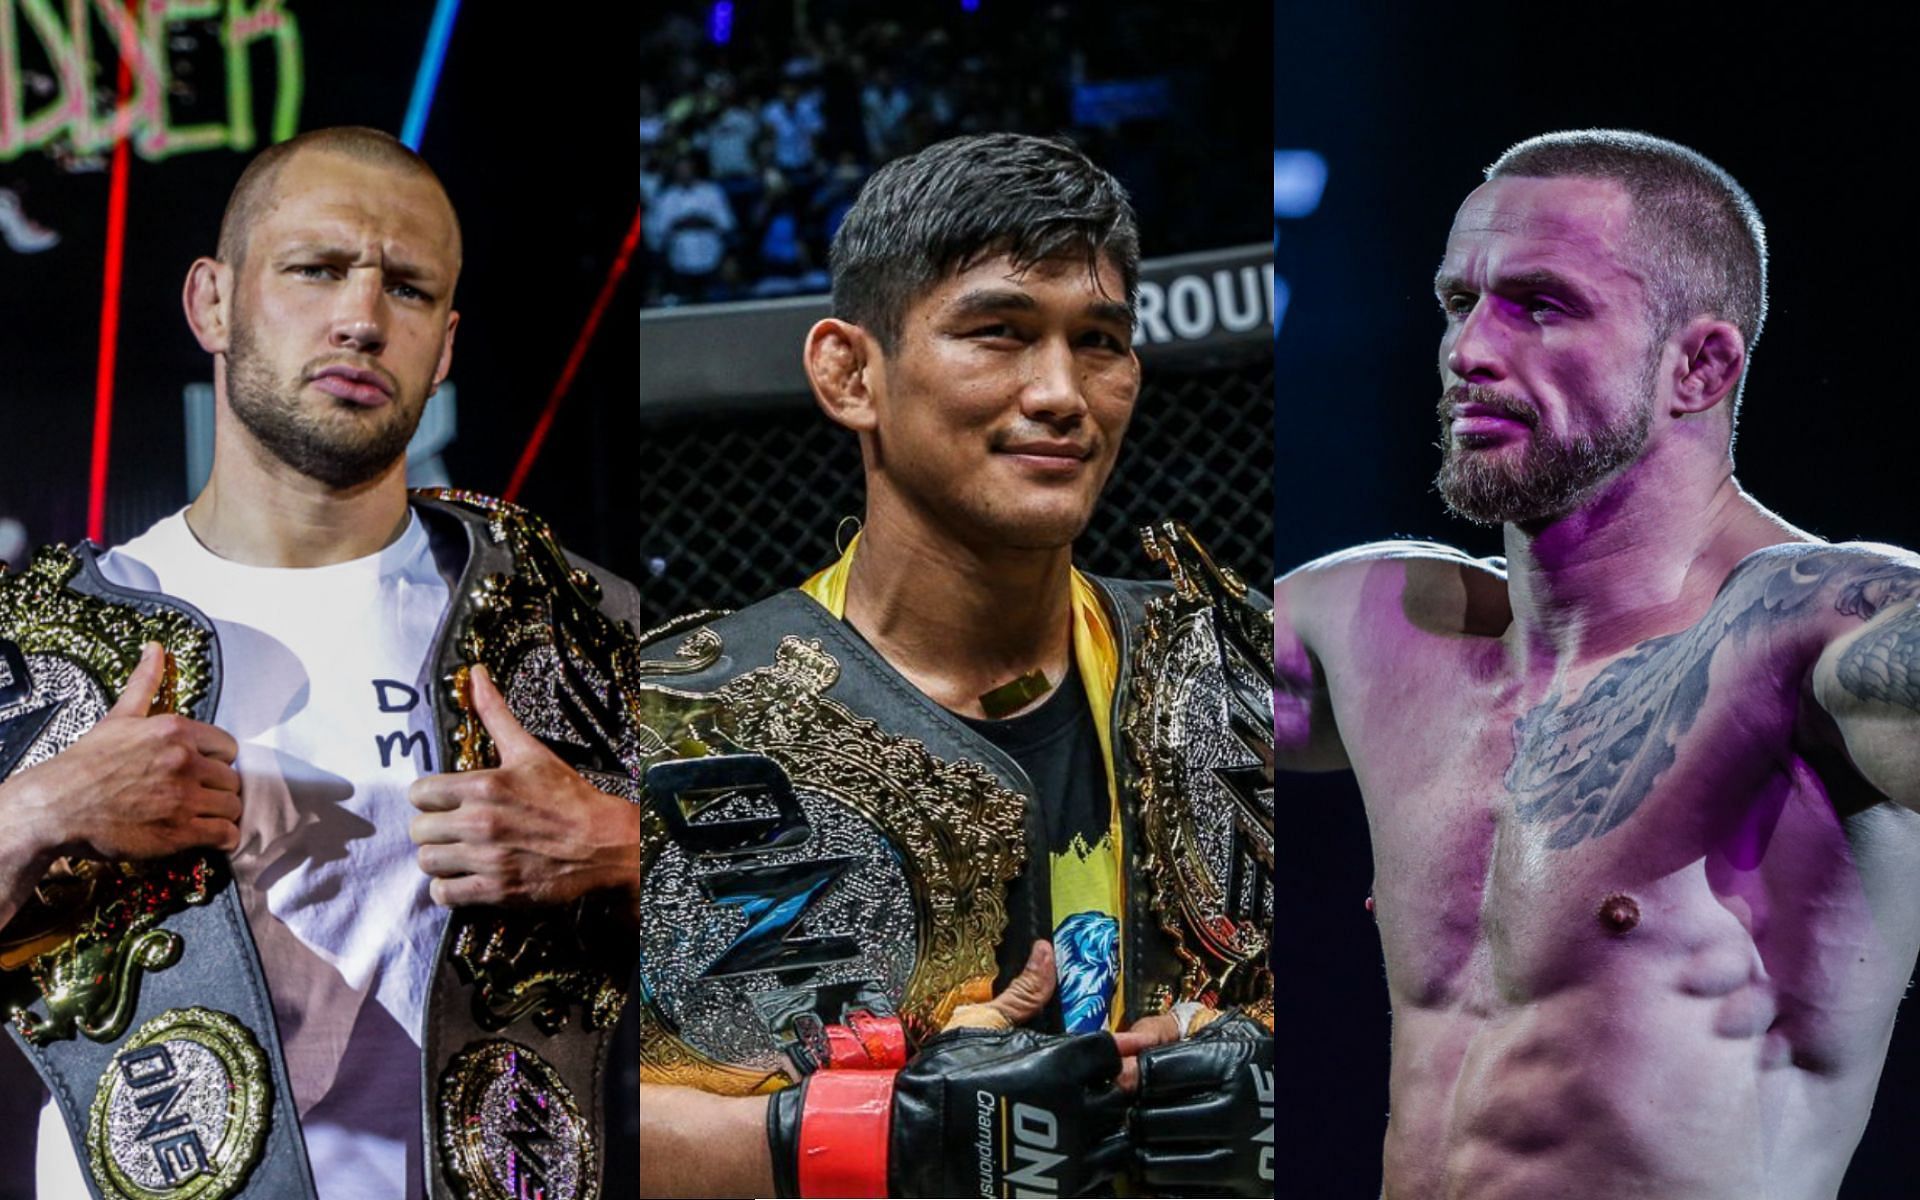 From left to right: Reinier De Ridder, Aung La N Sang, Vitaly Bigdash. [Photos ONE Championship]